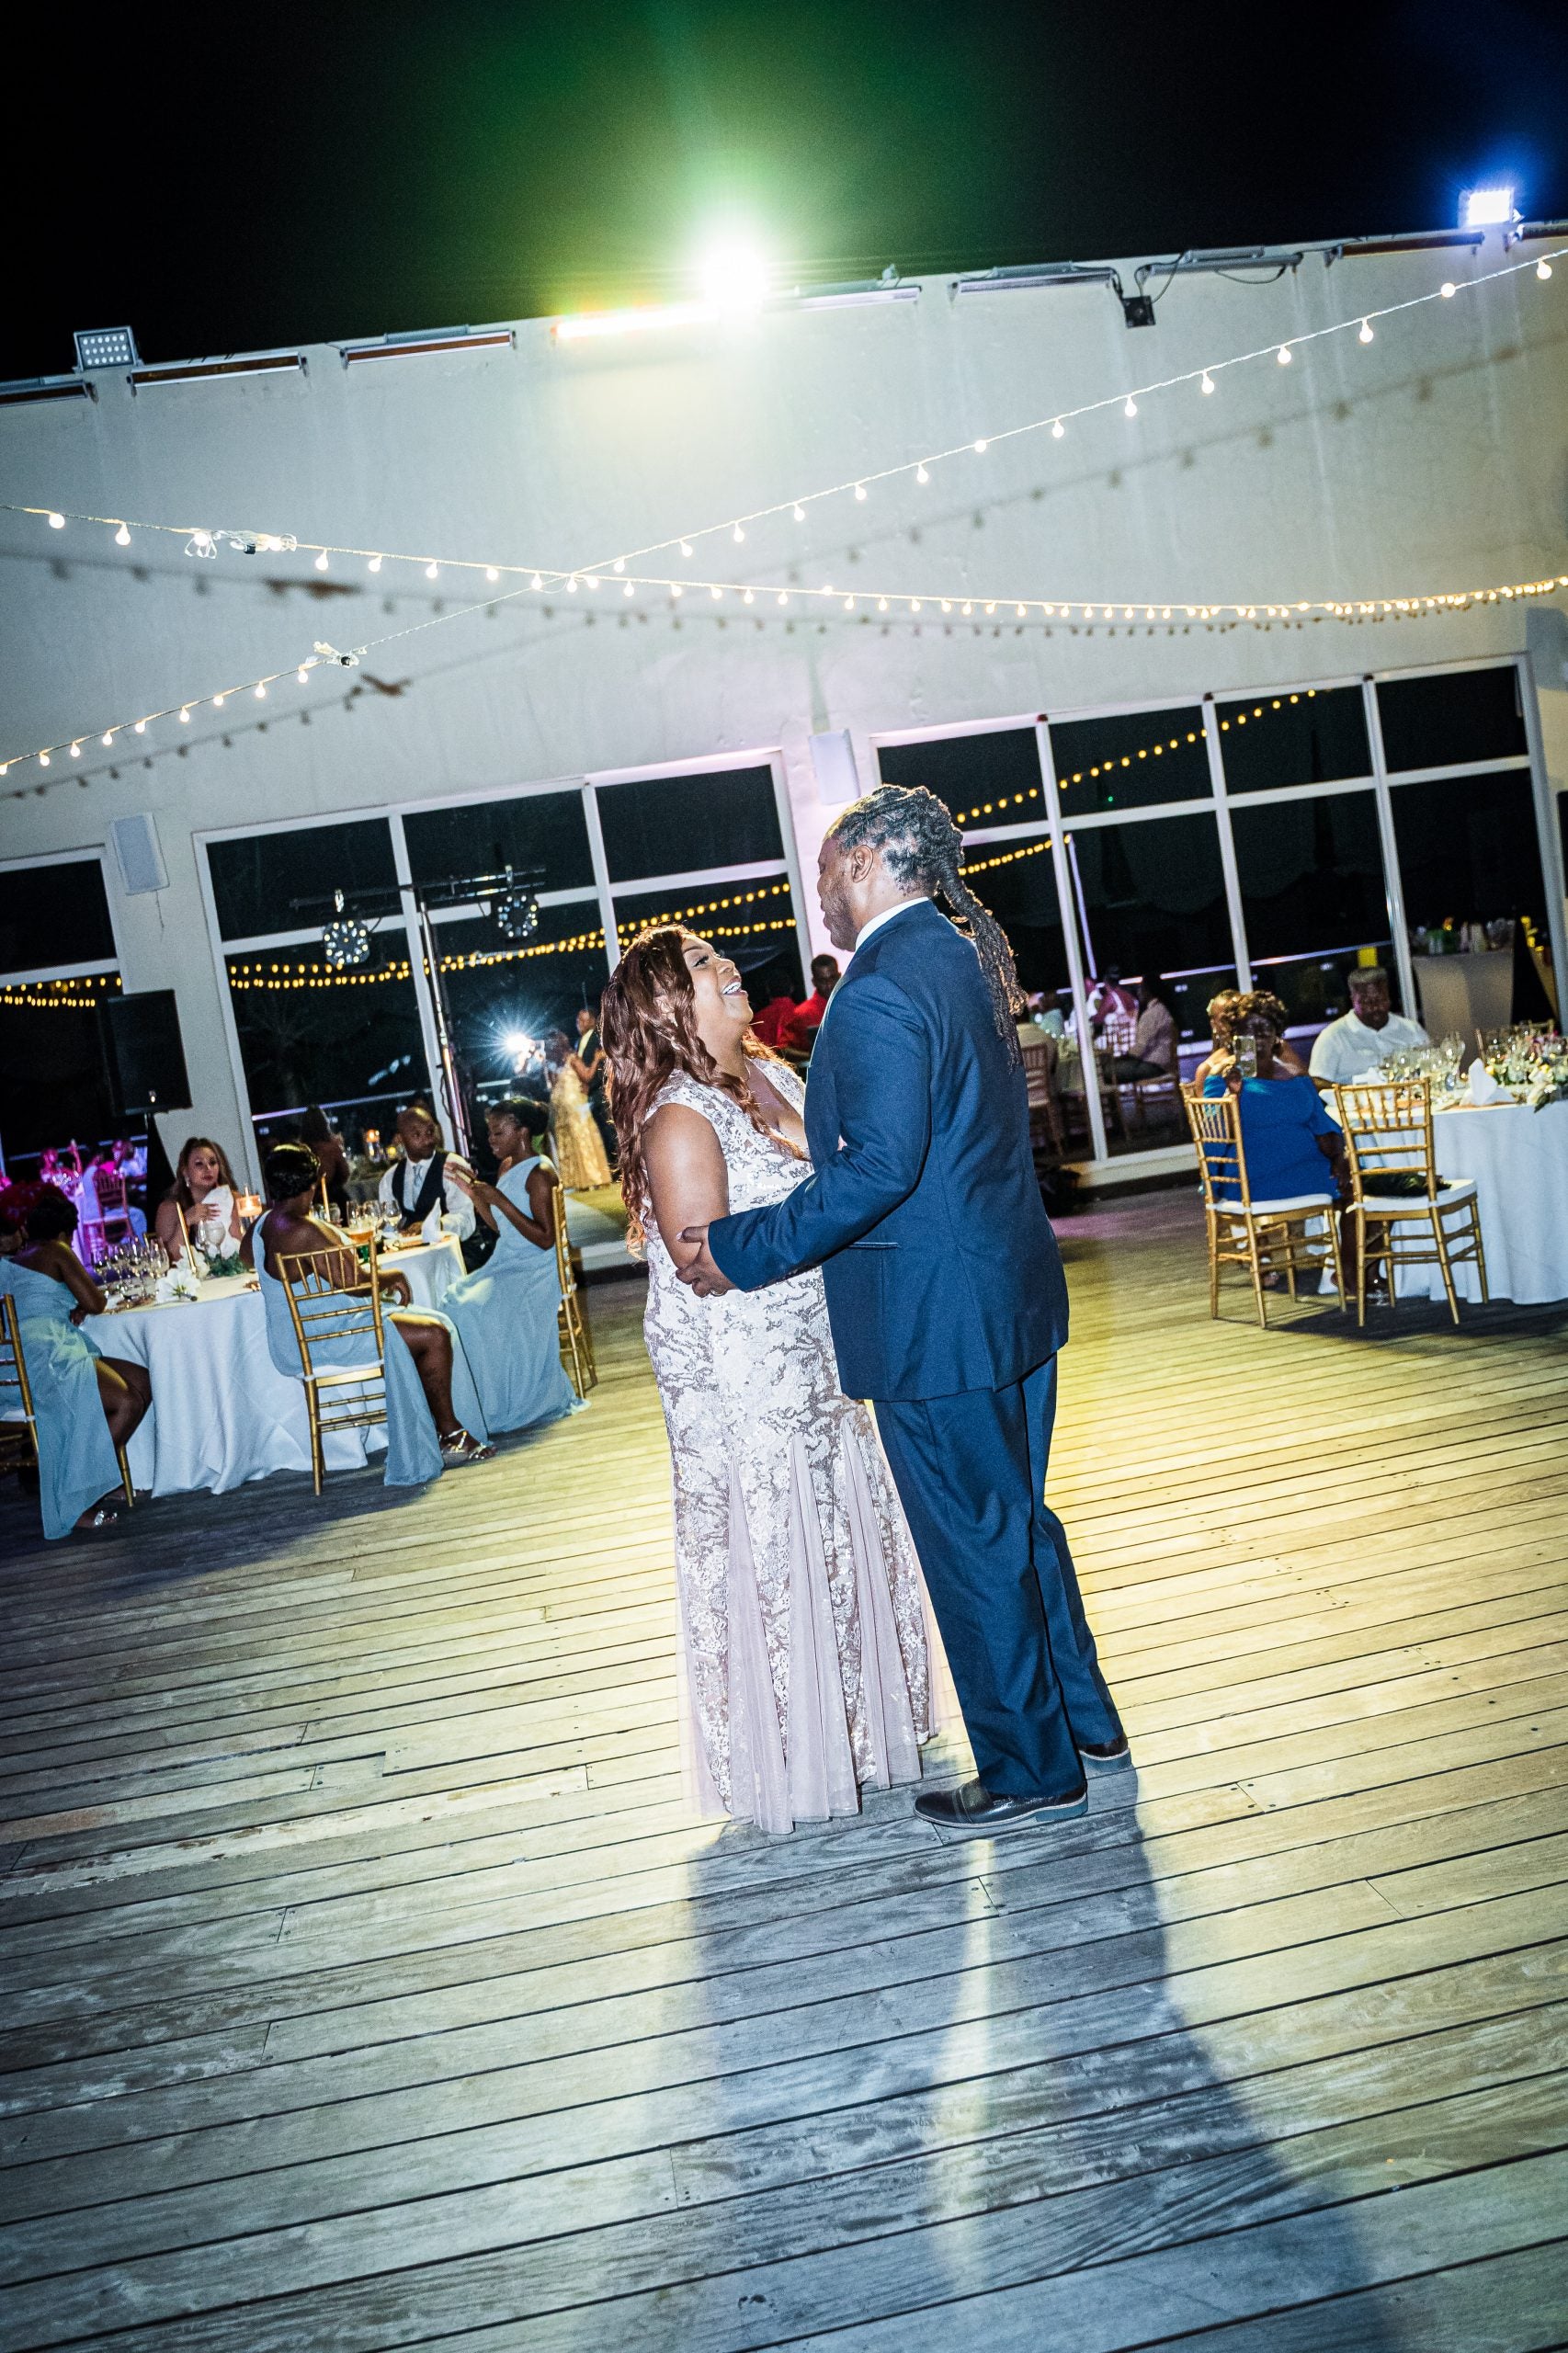 Bridal Bliss: Six-Footers Kimberly And Torrey Said “I Do” In Montego Bay With A Fiery Fête